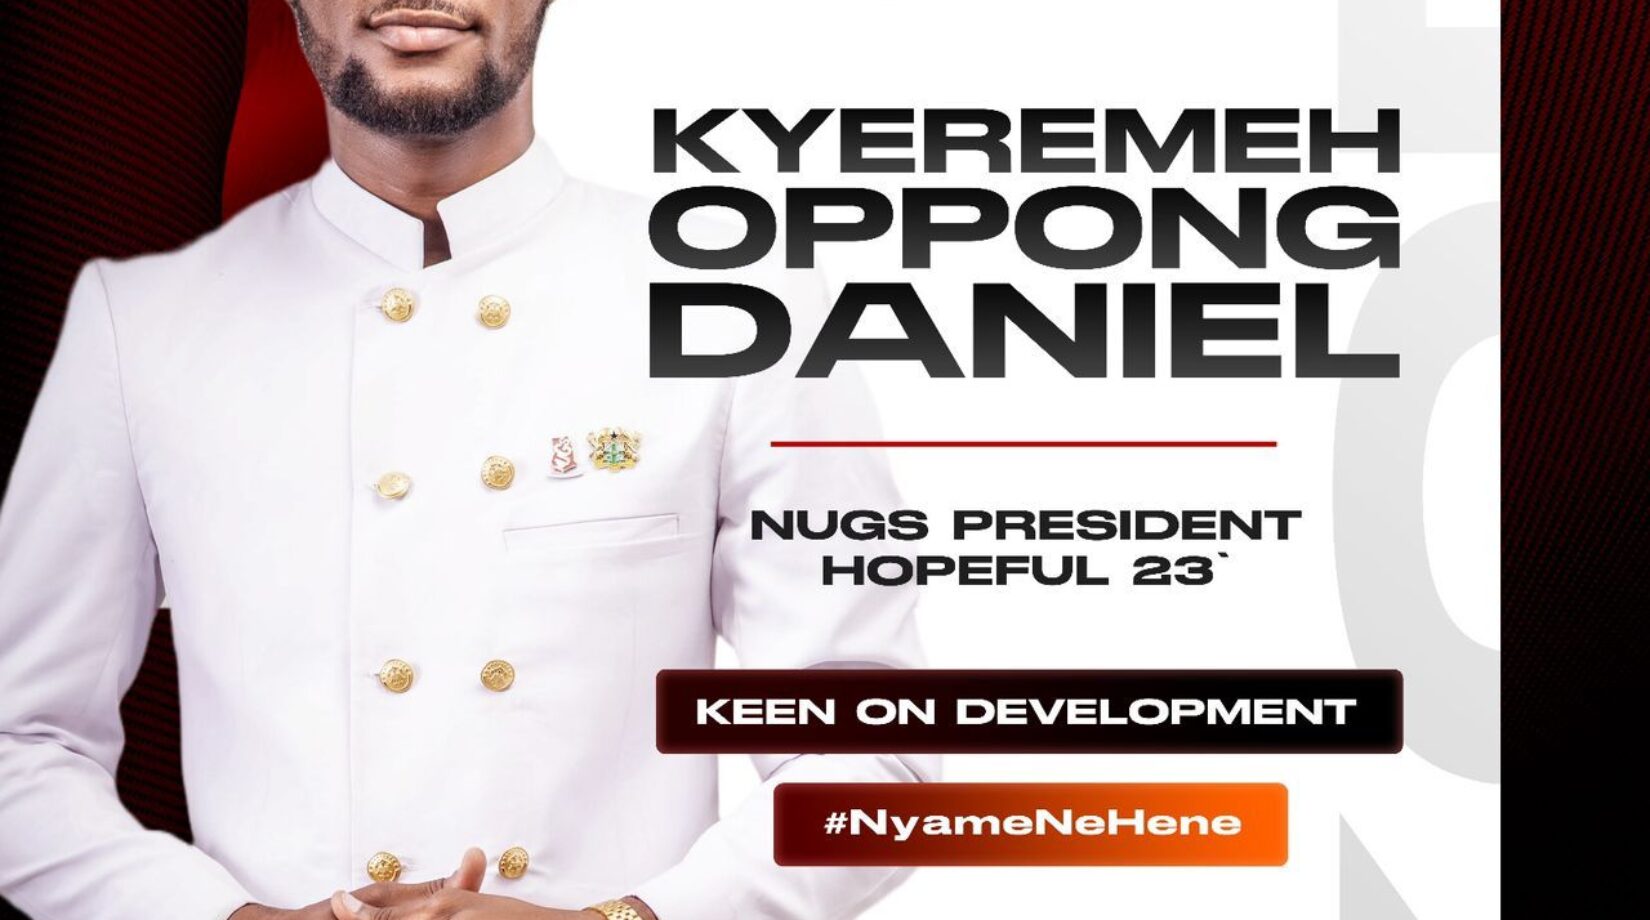 Kyeremeh Oppong Daniel to Contest NUGS presidency, pledges to prioritize students’ welfare and development